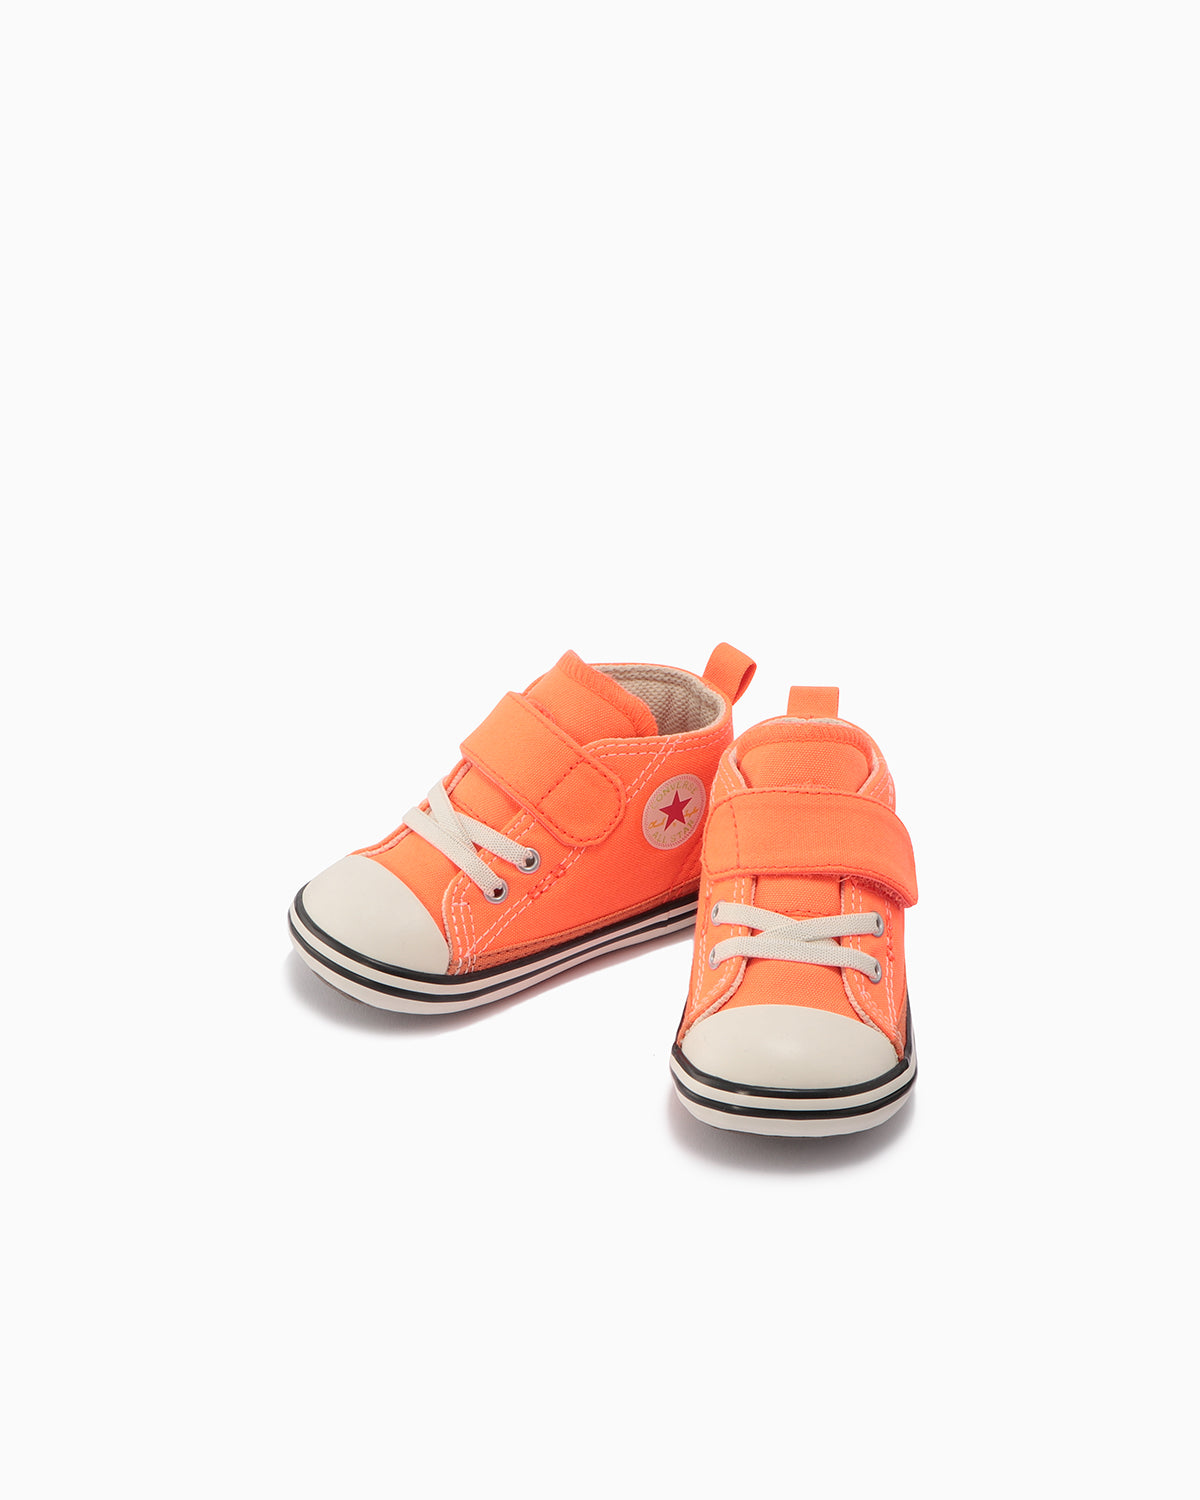 BABY ALL STAR N NEONCOLORS OF V-1